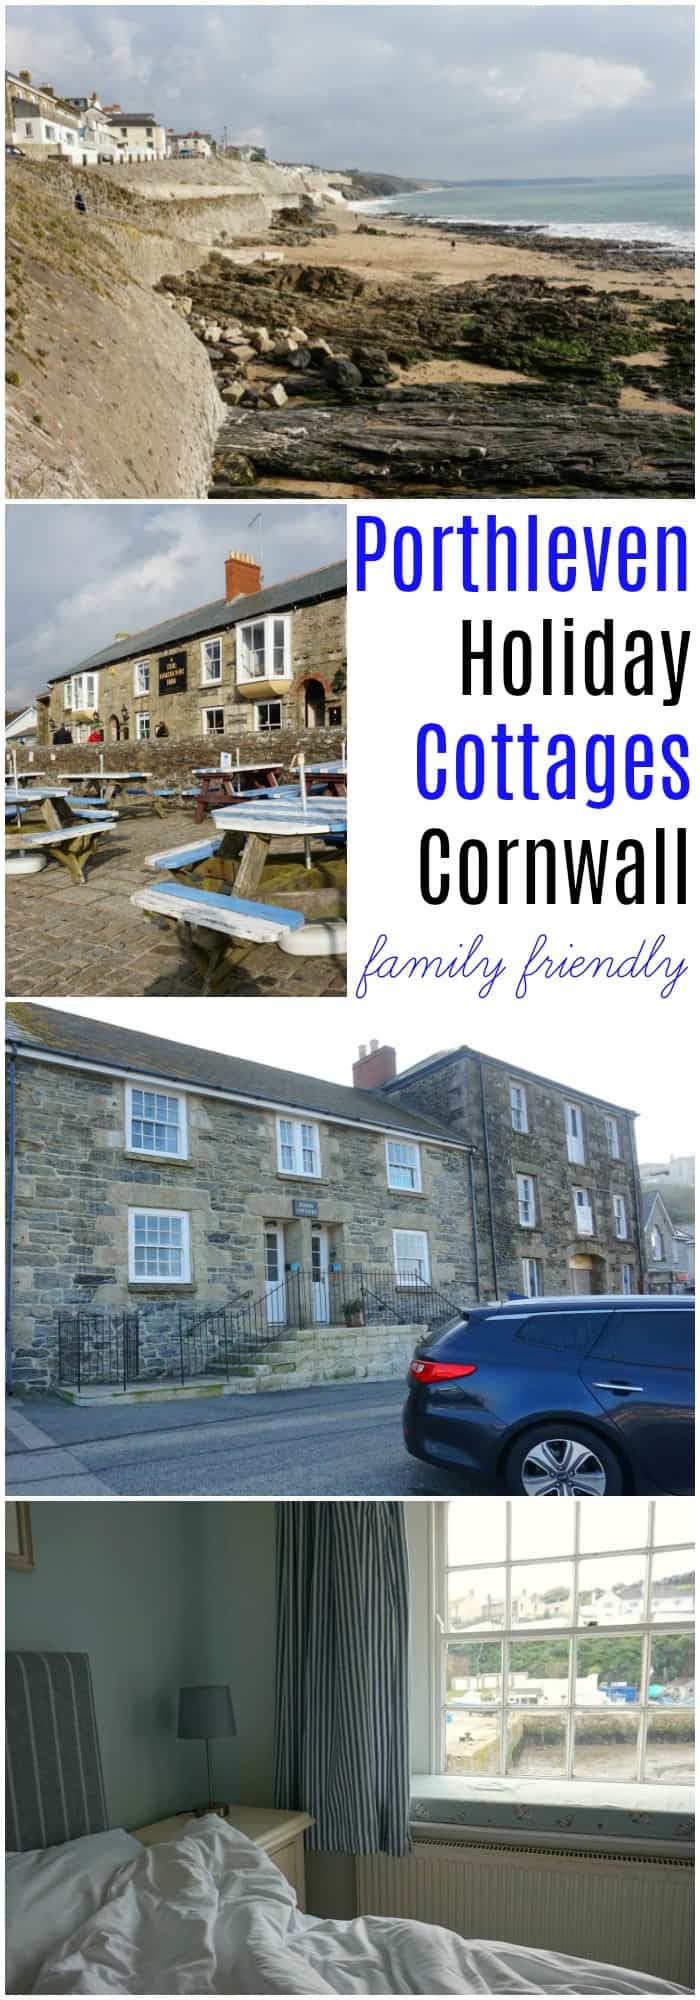 Porthleven Holiday Cottages Cornwall - family friendly self catering accommodation #uktravel #lovecornwall #cornwall